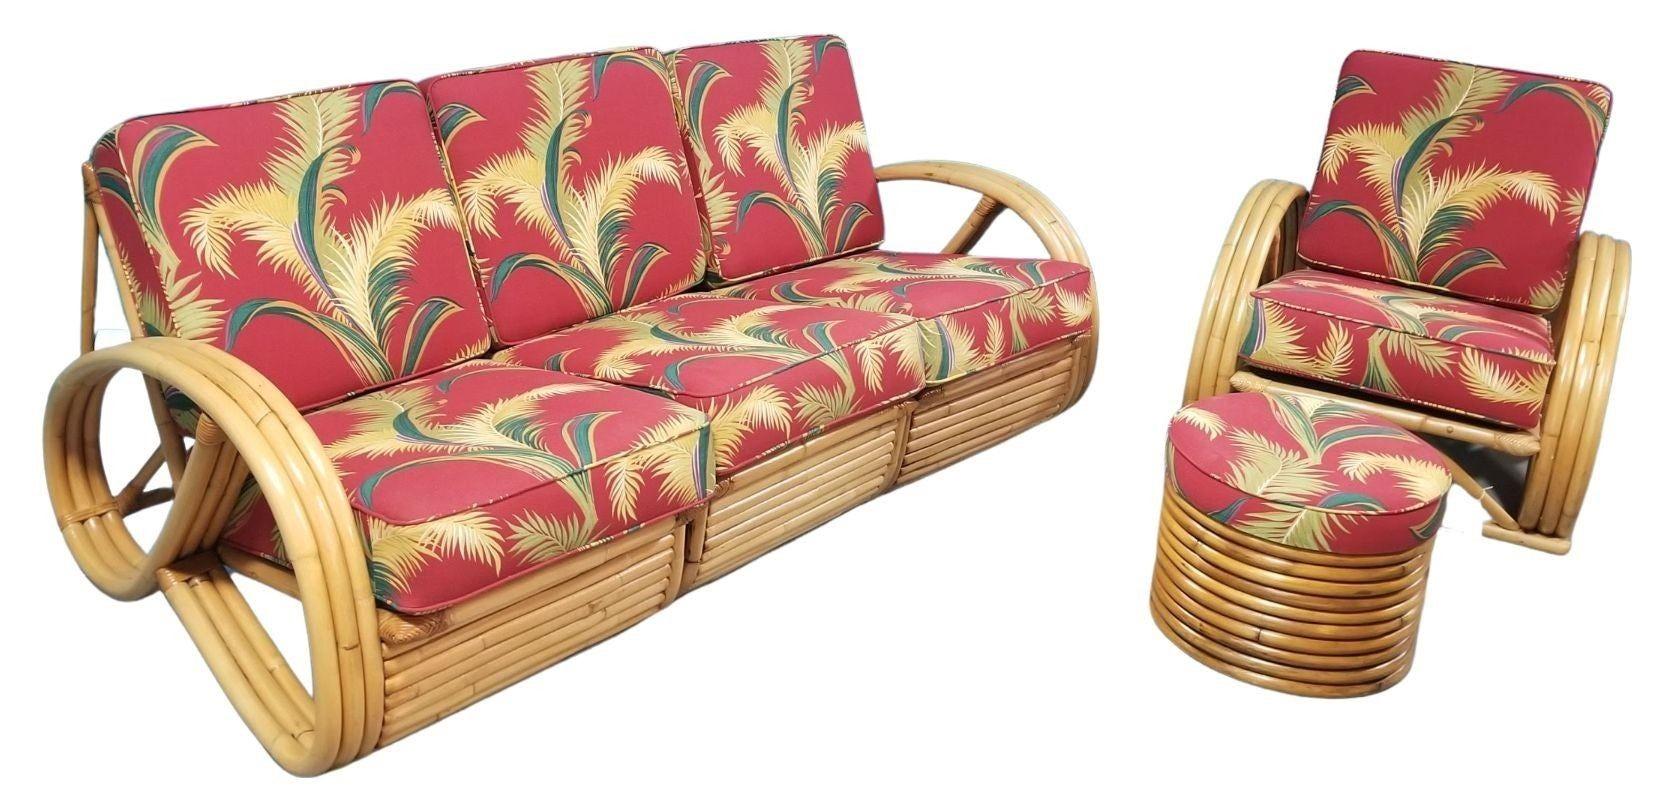 4-piece living room set of restored rattan with matching 3/4 pretzel arm furniture featuring a 3-seat sectional sofa, an adjustable lounge chair and ottoman, and a 2-seat sectional settee loveseat.

1950, United States

Couch: 32